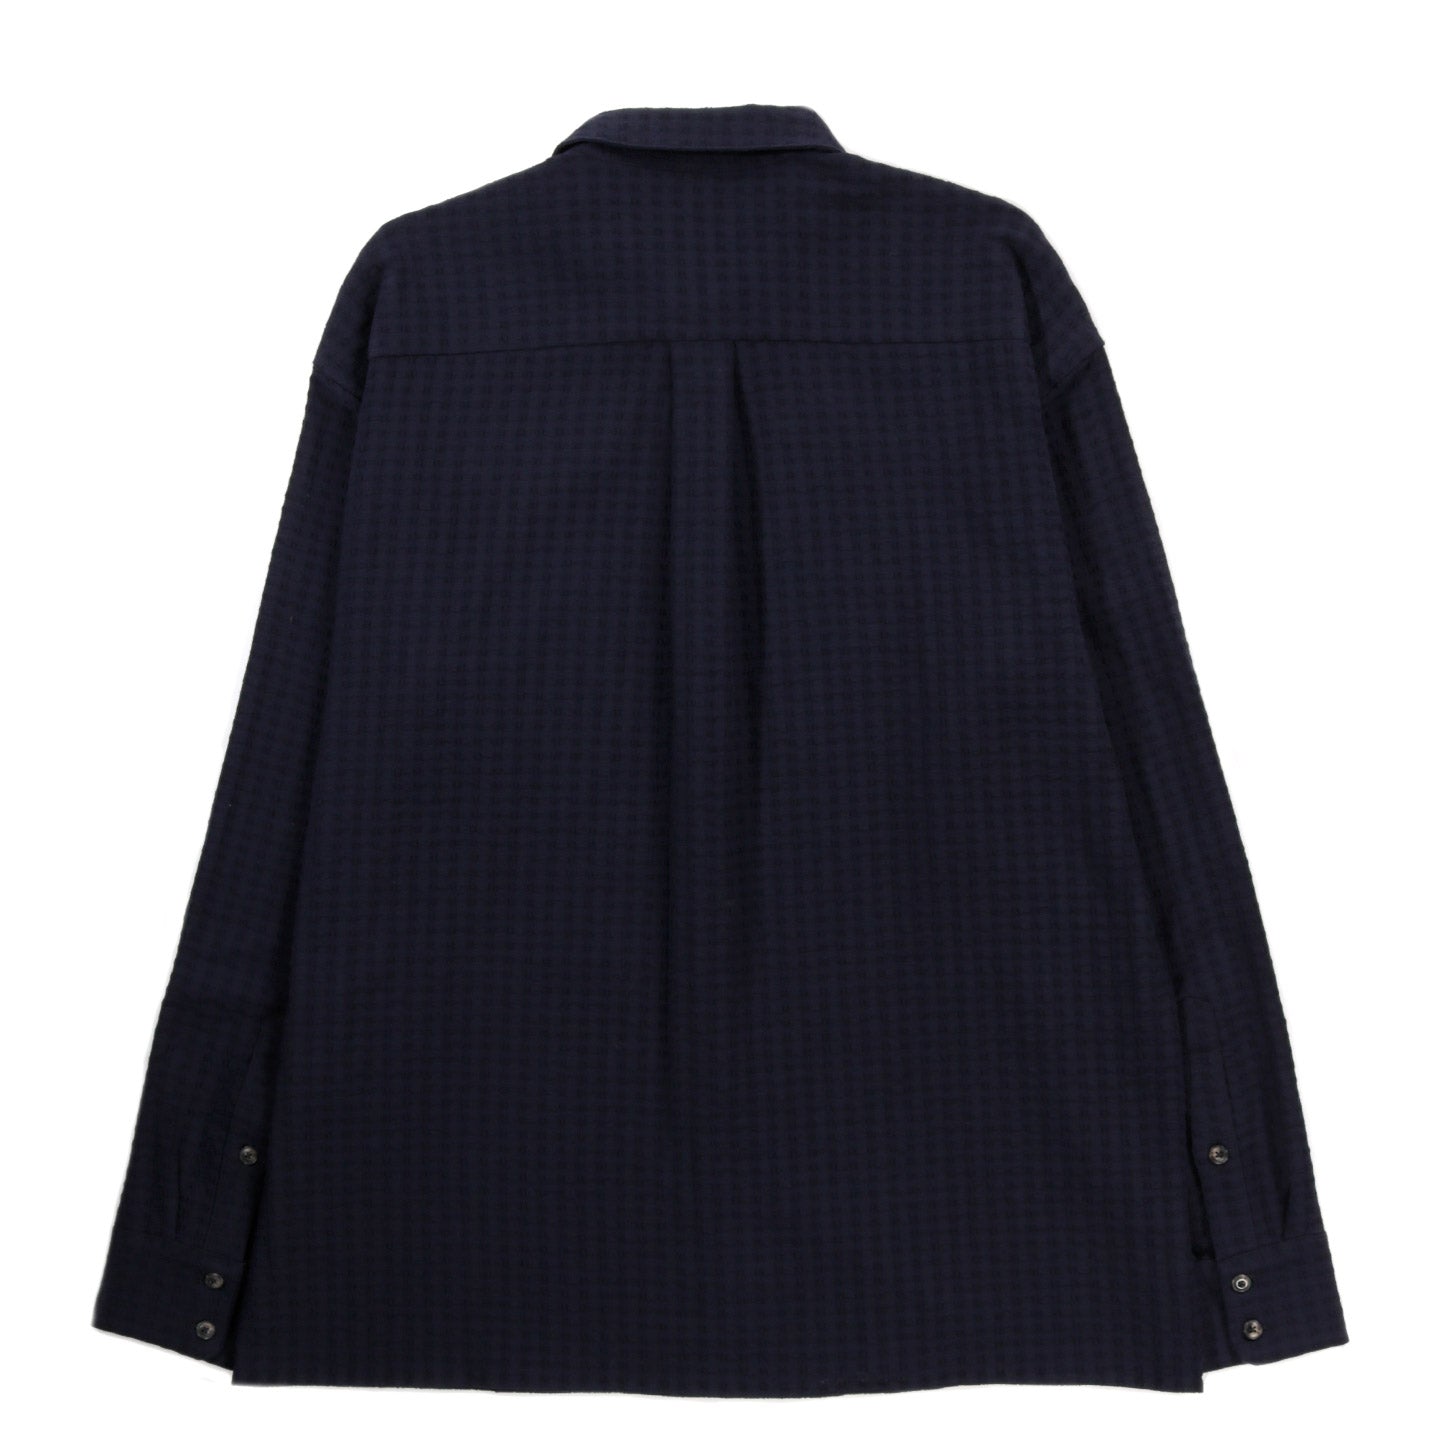 A KIND OF GUISE GUSTO SHIRT TWISTED NAVY STRIPE